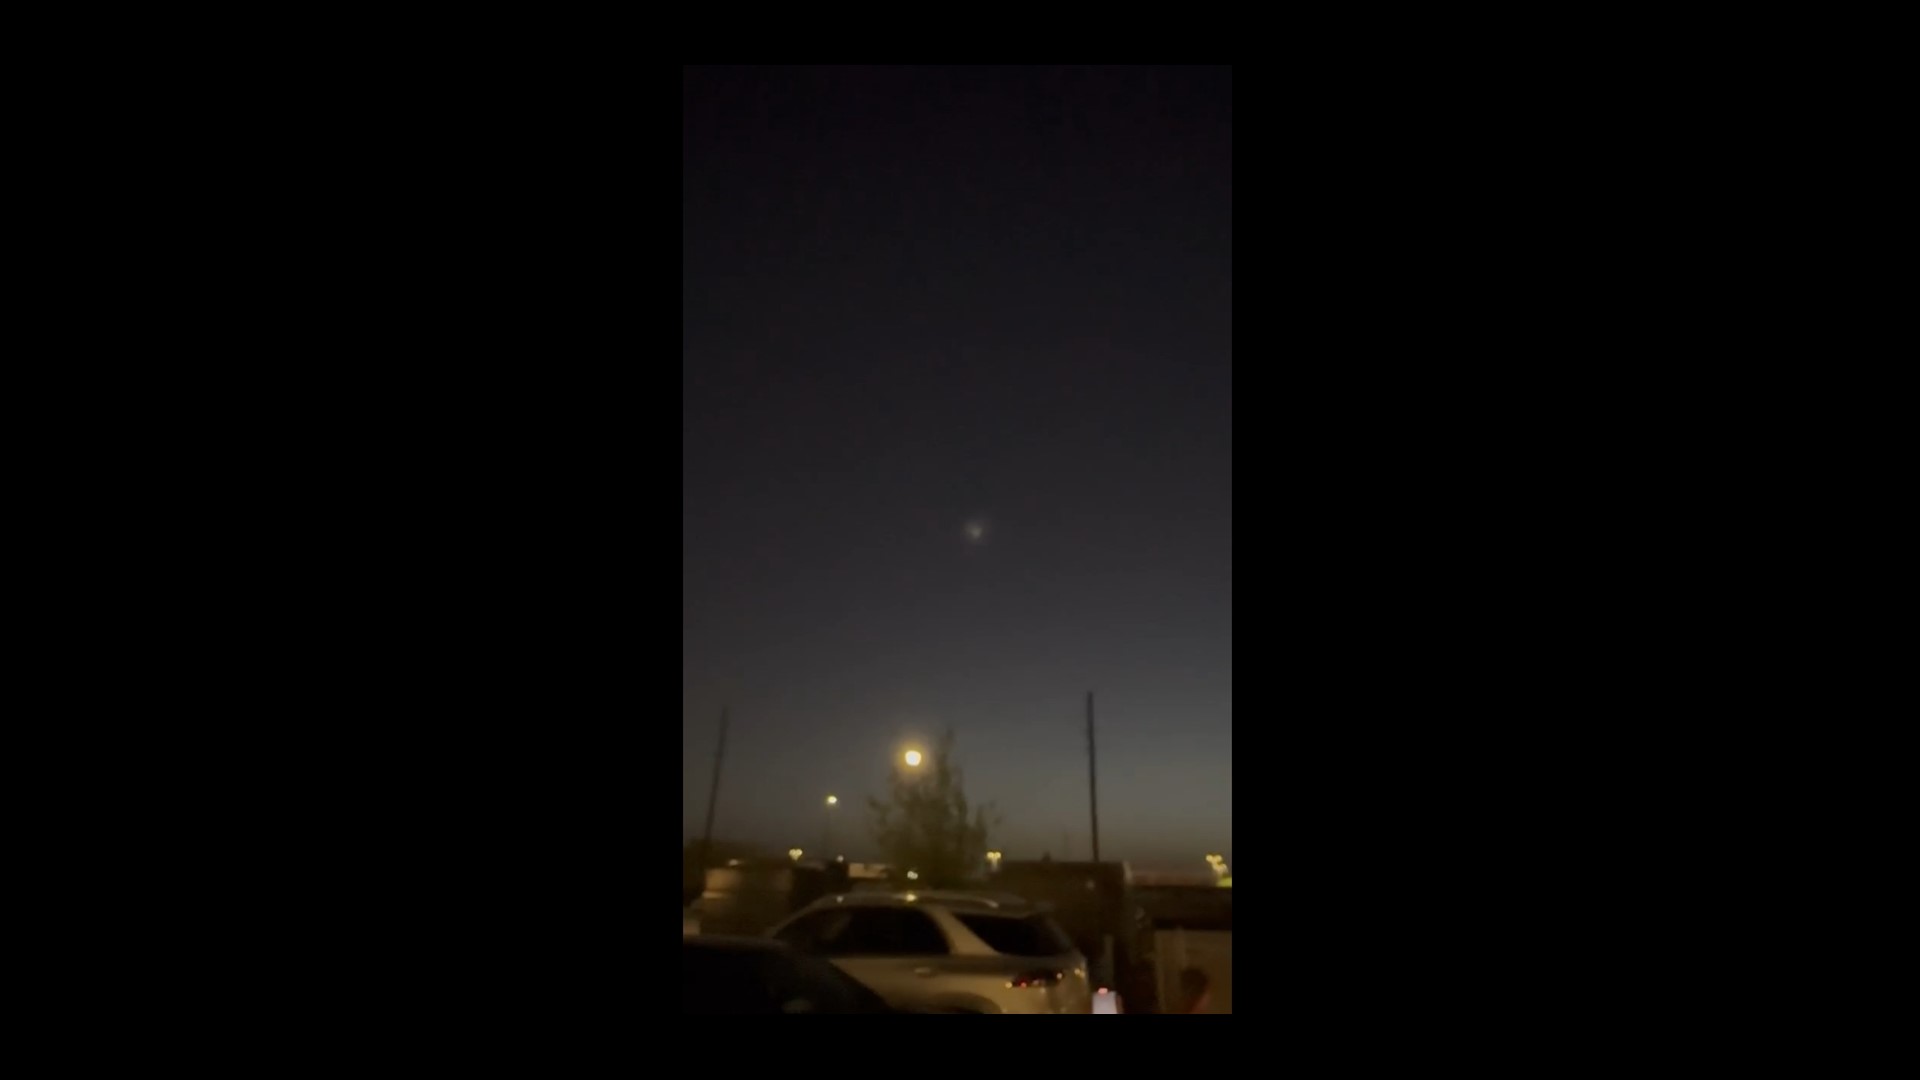 A SpaceX rocket that launched Starlink satellites in Florida was seen in the Houston area on Monday, March 25.